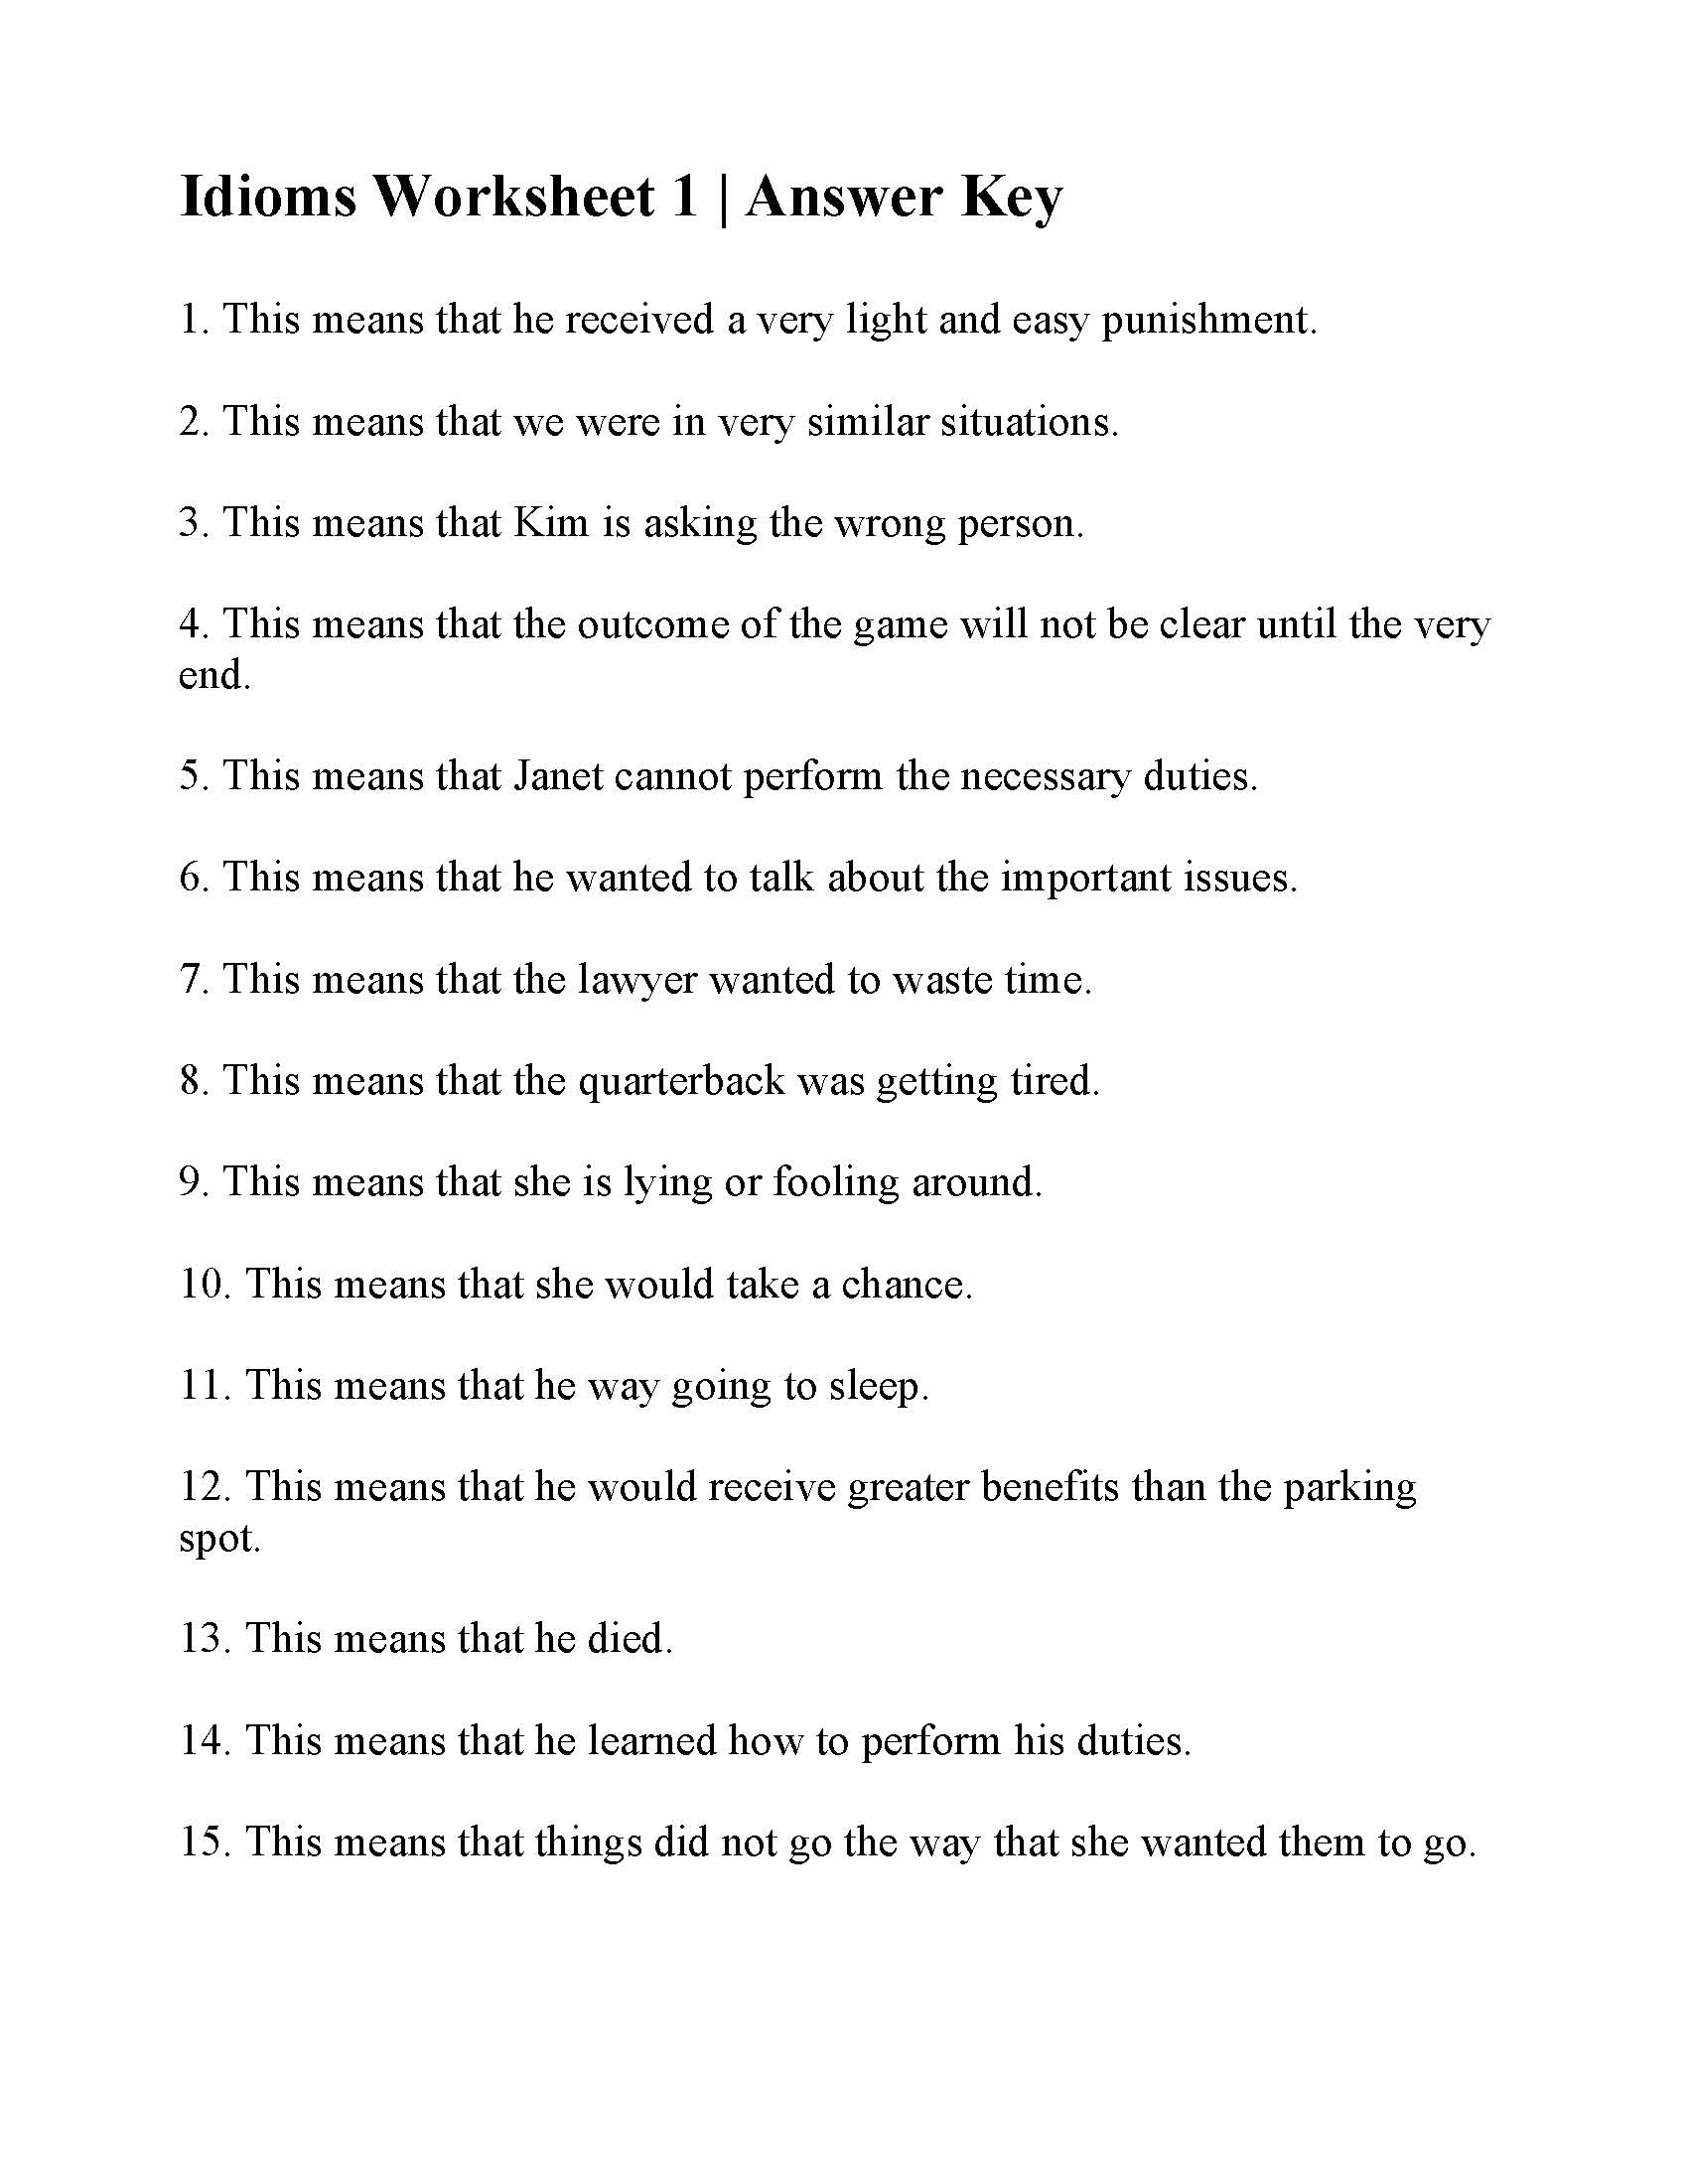 This is a preview image of Idiom Worksheet 1. Click on it to enlarge it or view the source file.